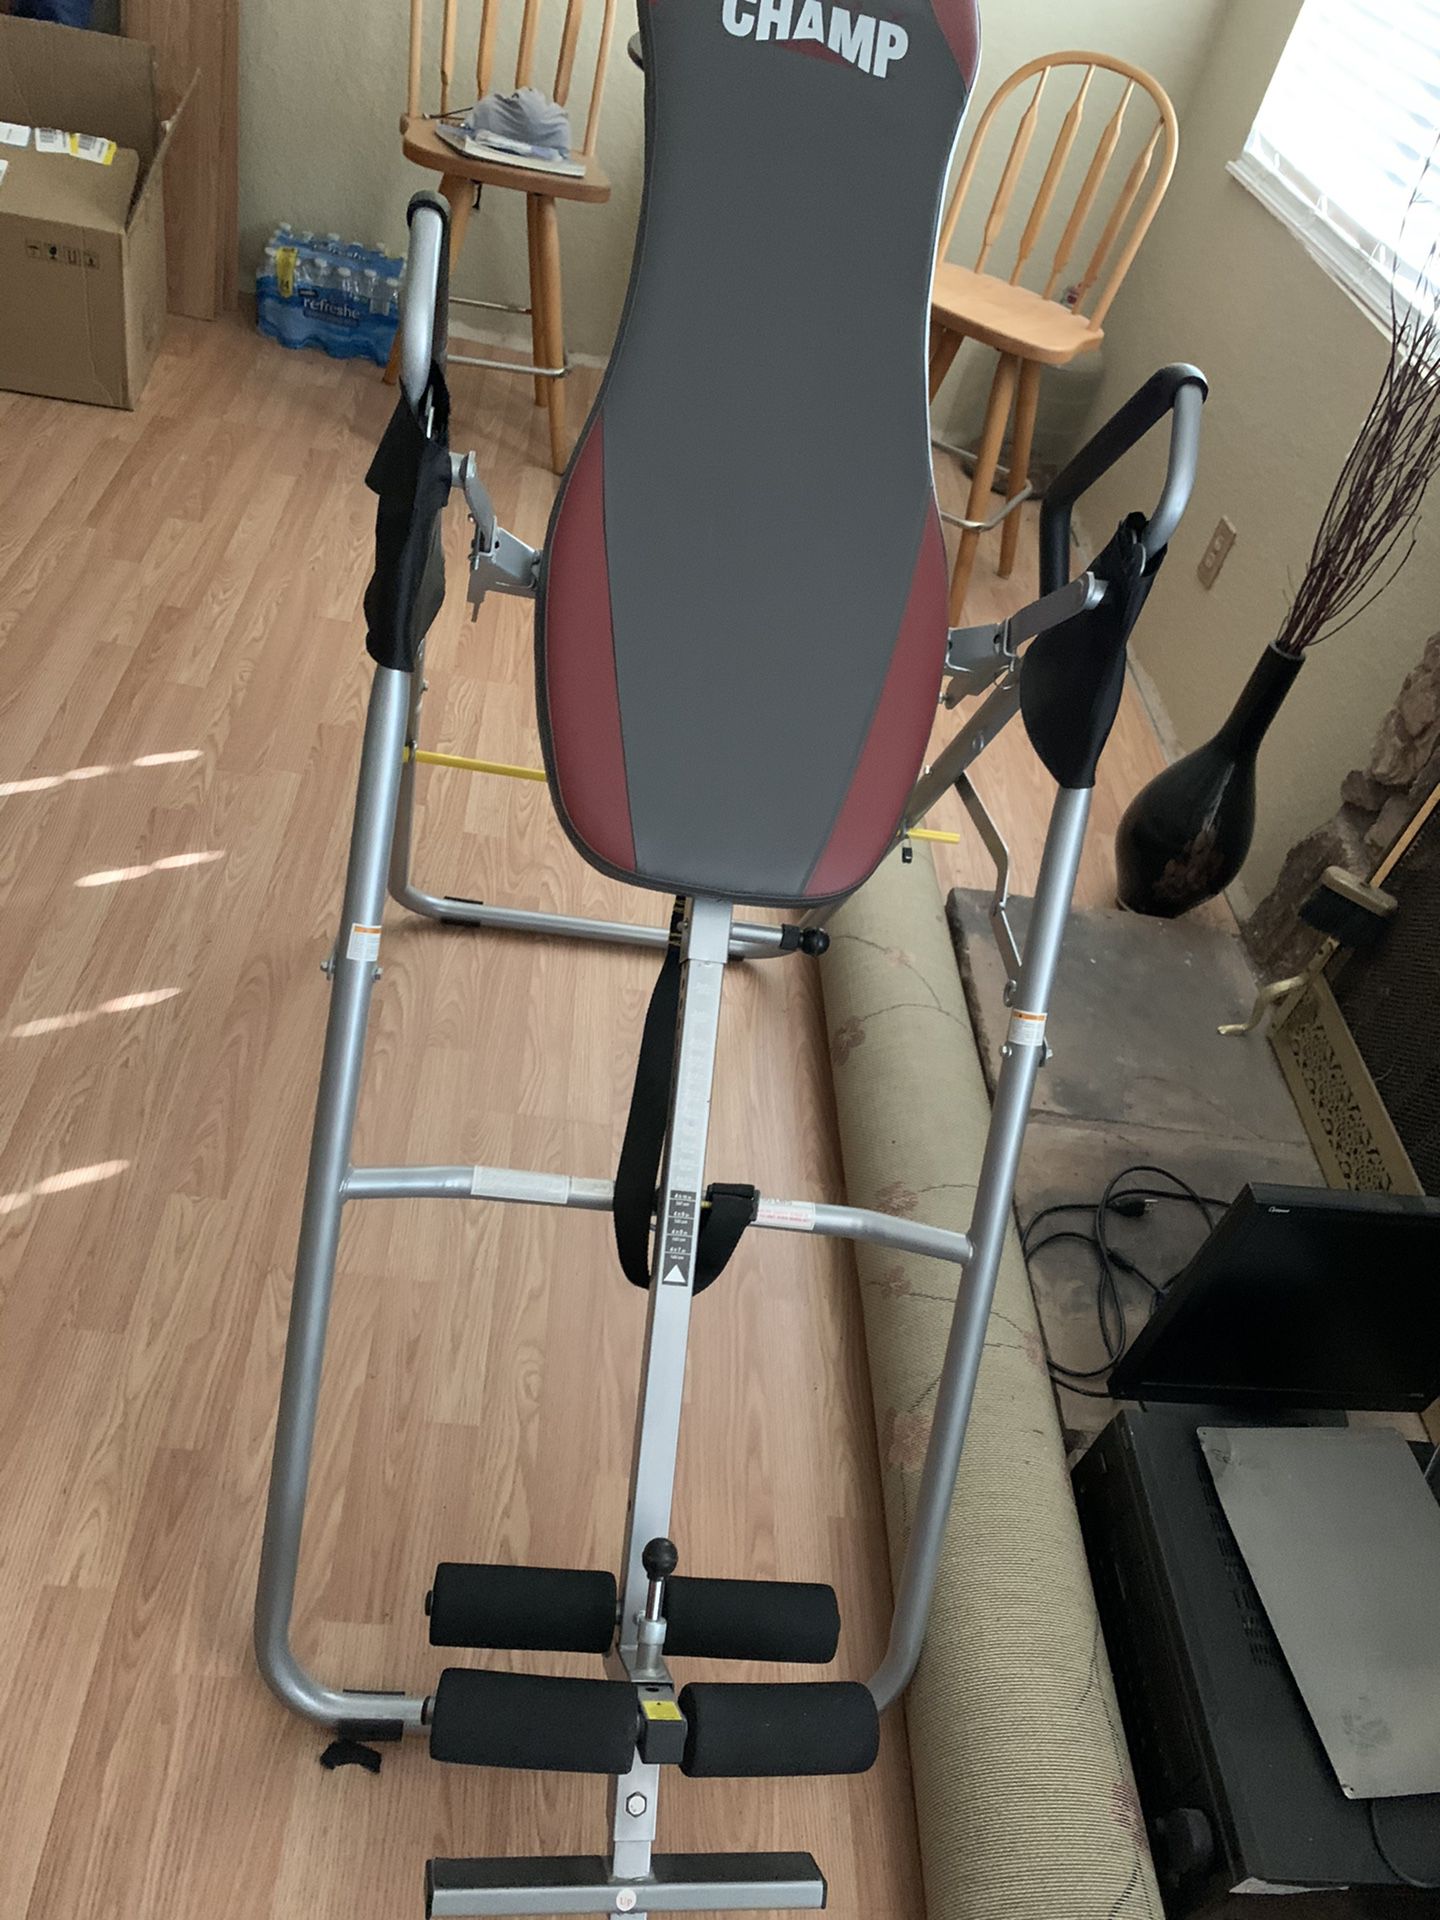 INVERSION TABLE 75$ MOVING OUT OF COUNTRY